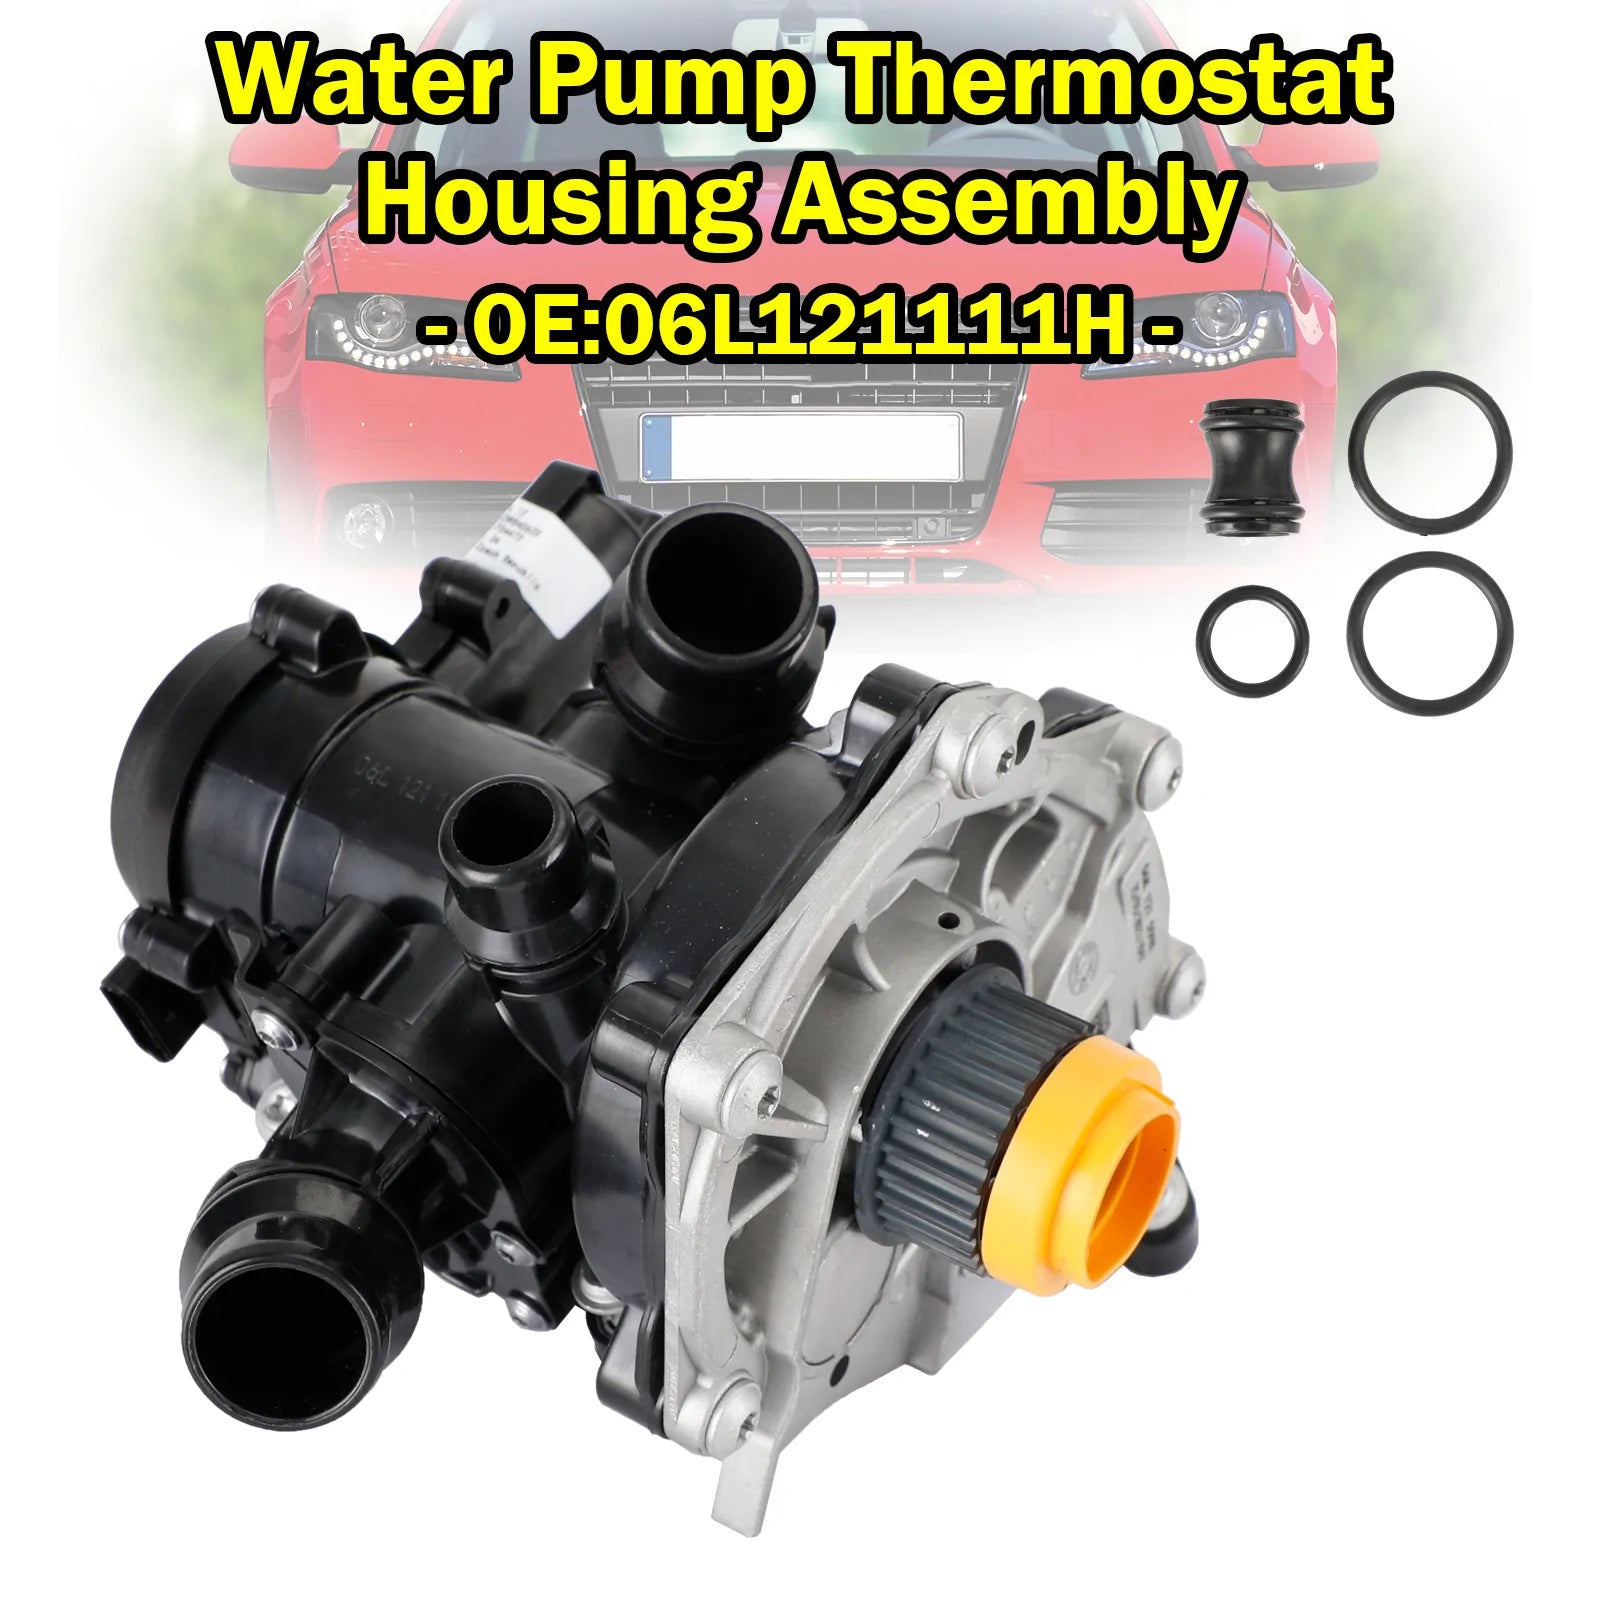 06L121111H Audi A4 A5 A6 A7 S1 S3 TT Waterpomp Thermostaat Behuizing Montage